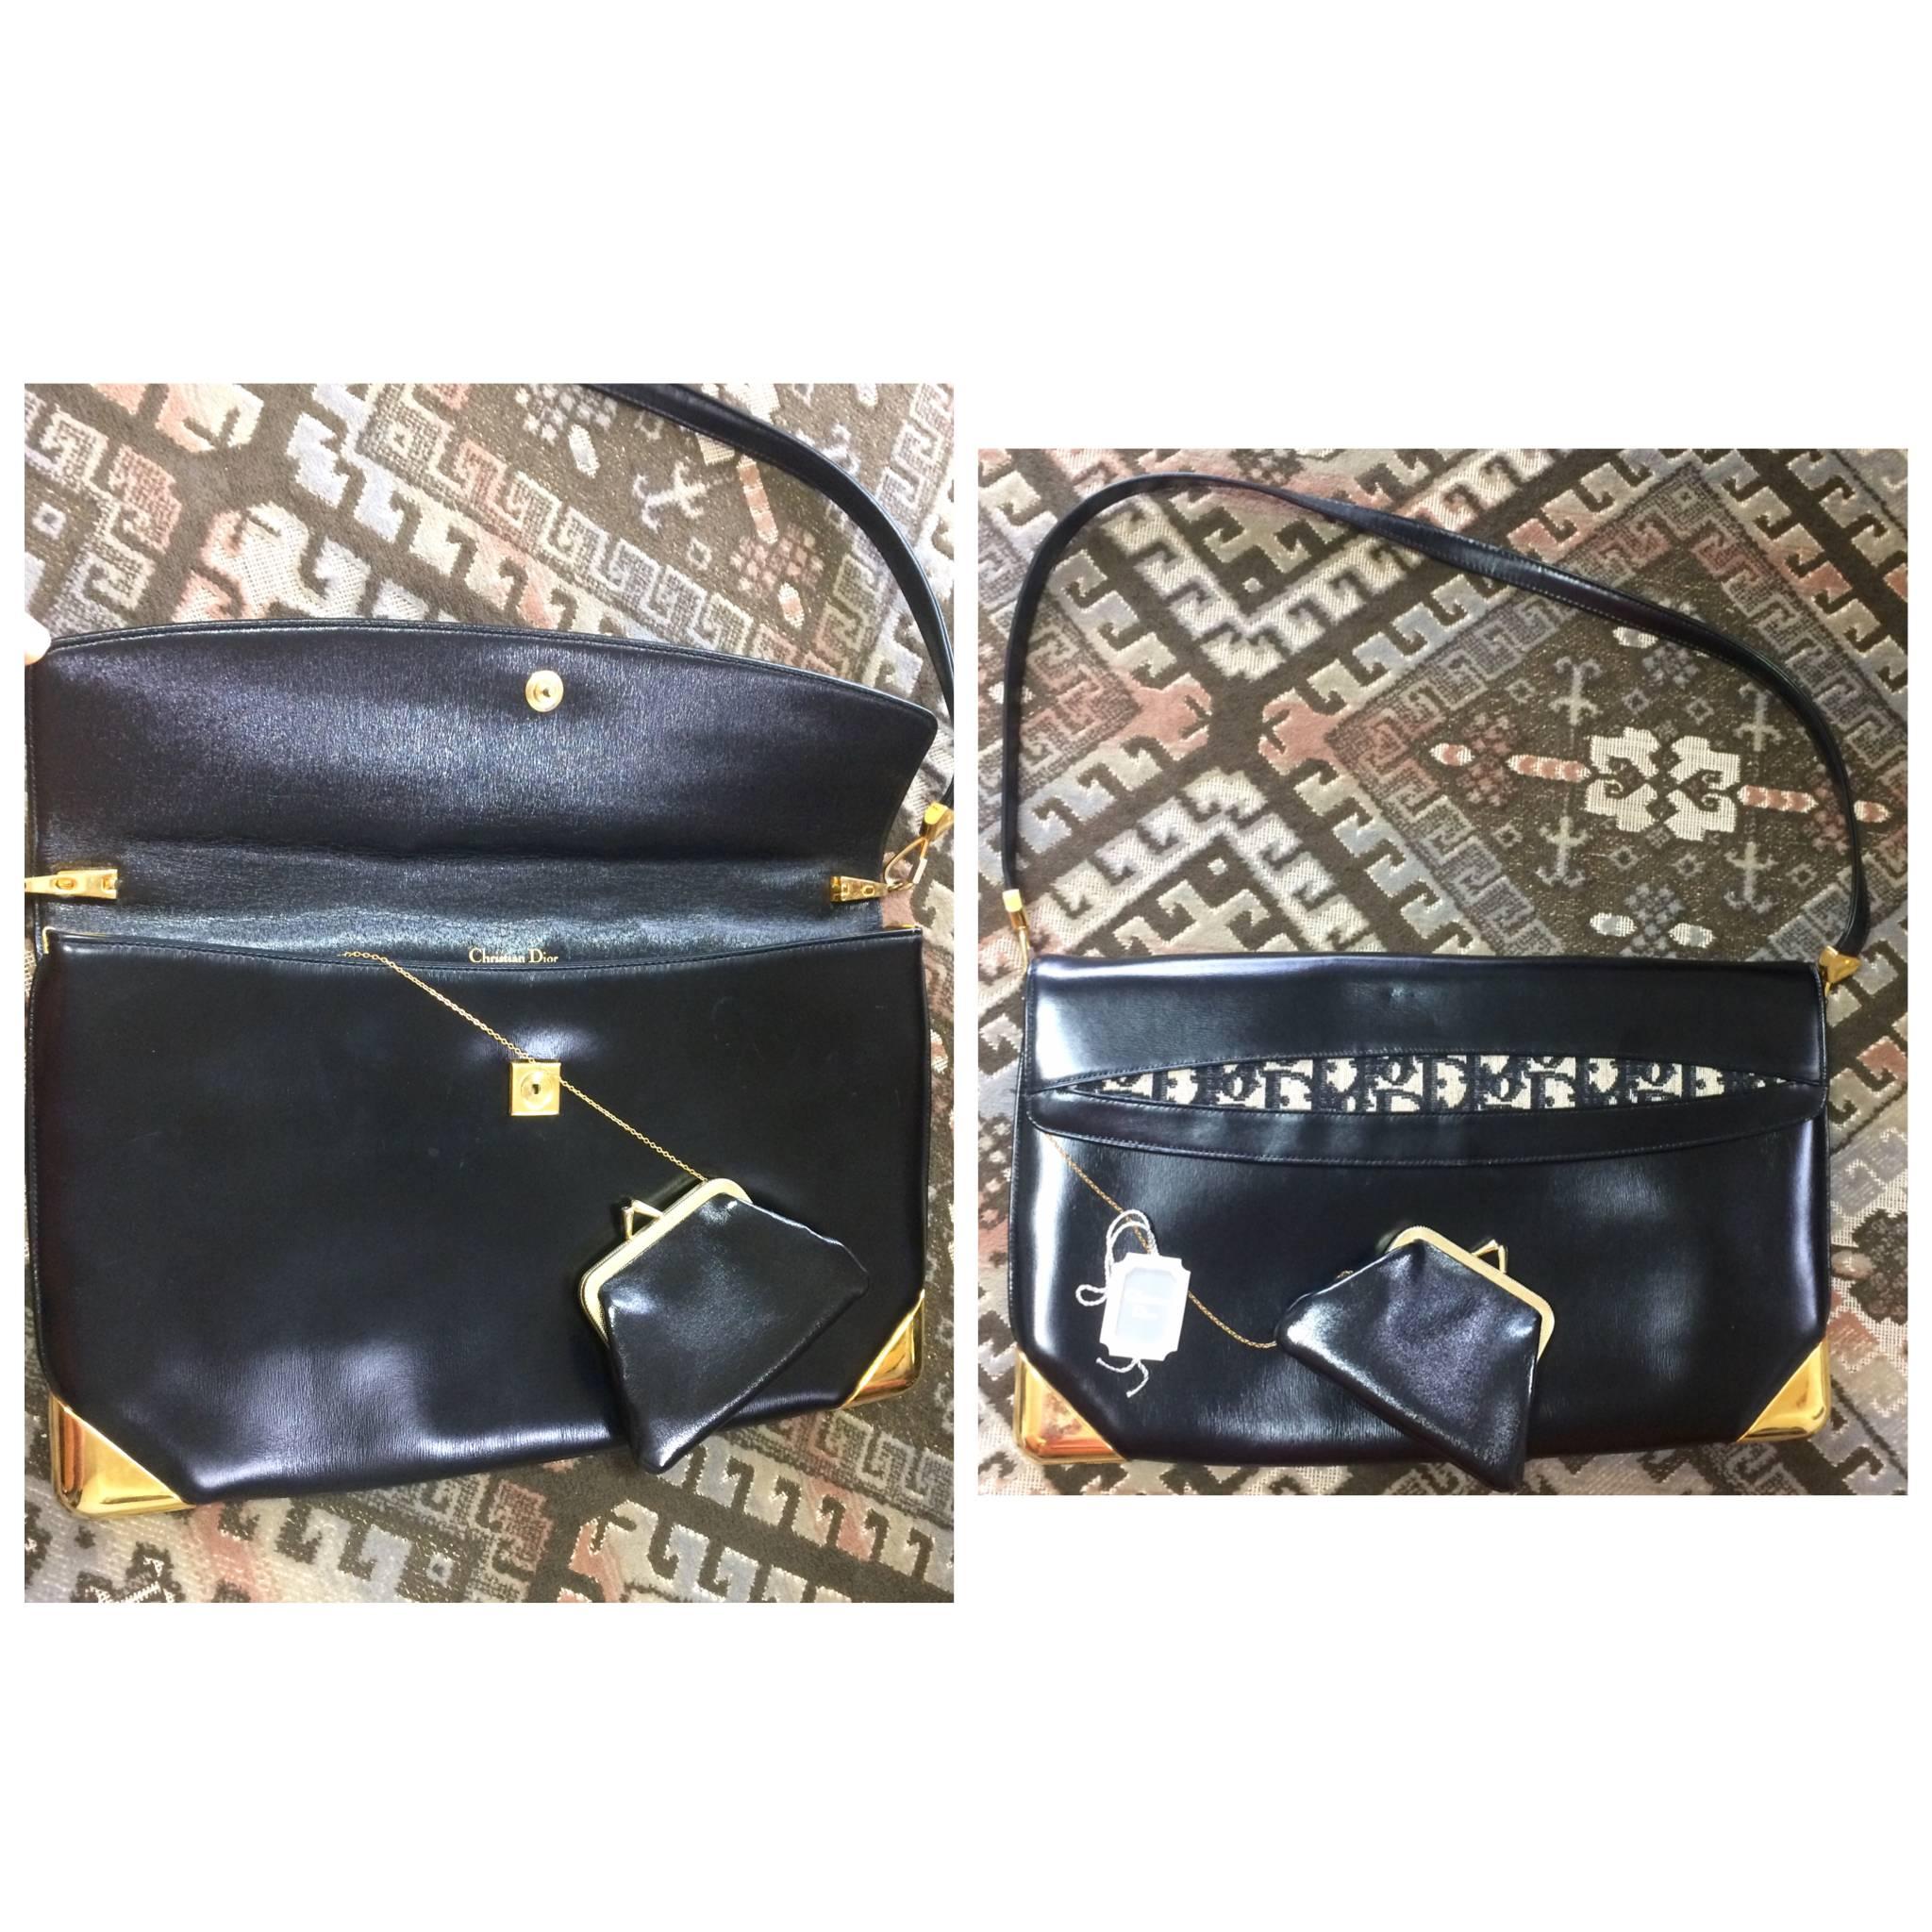 1980s. Vintage Christian Dior black leather large clutch purse, shoulder bag with navy trotter jacquard and golden frames. Comes with coin case.

This is a  Christian Dior genuine black calfskin classic large clutch shoulder bag, featuring golden